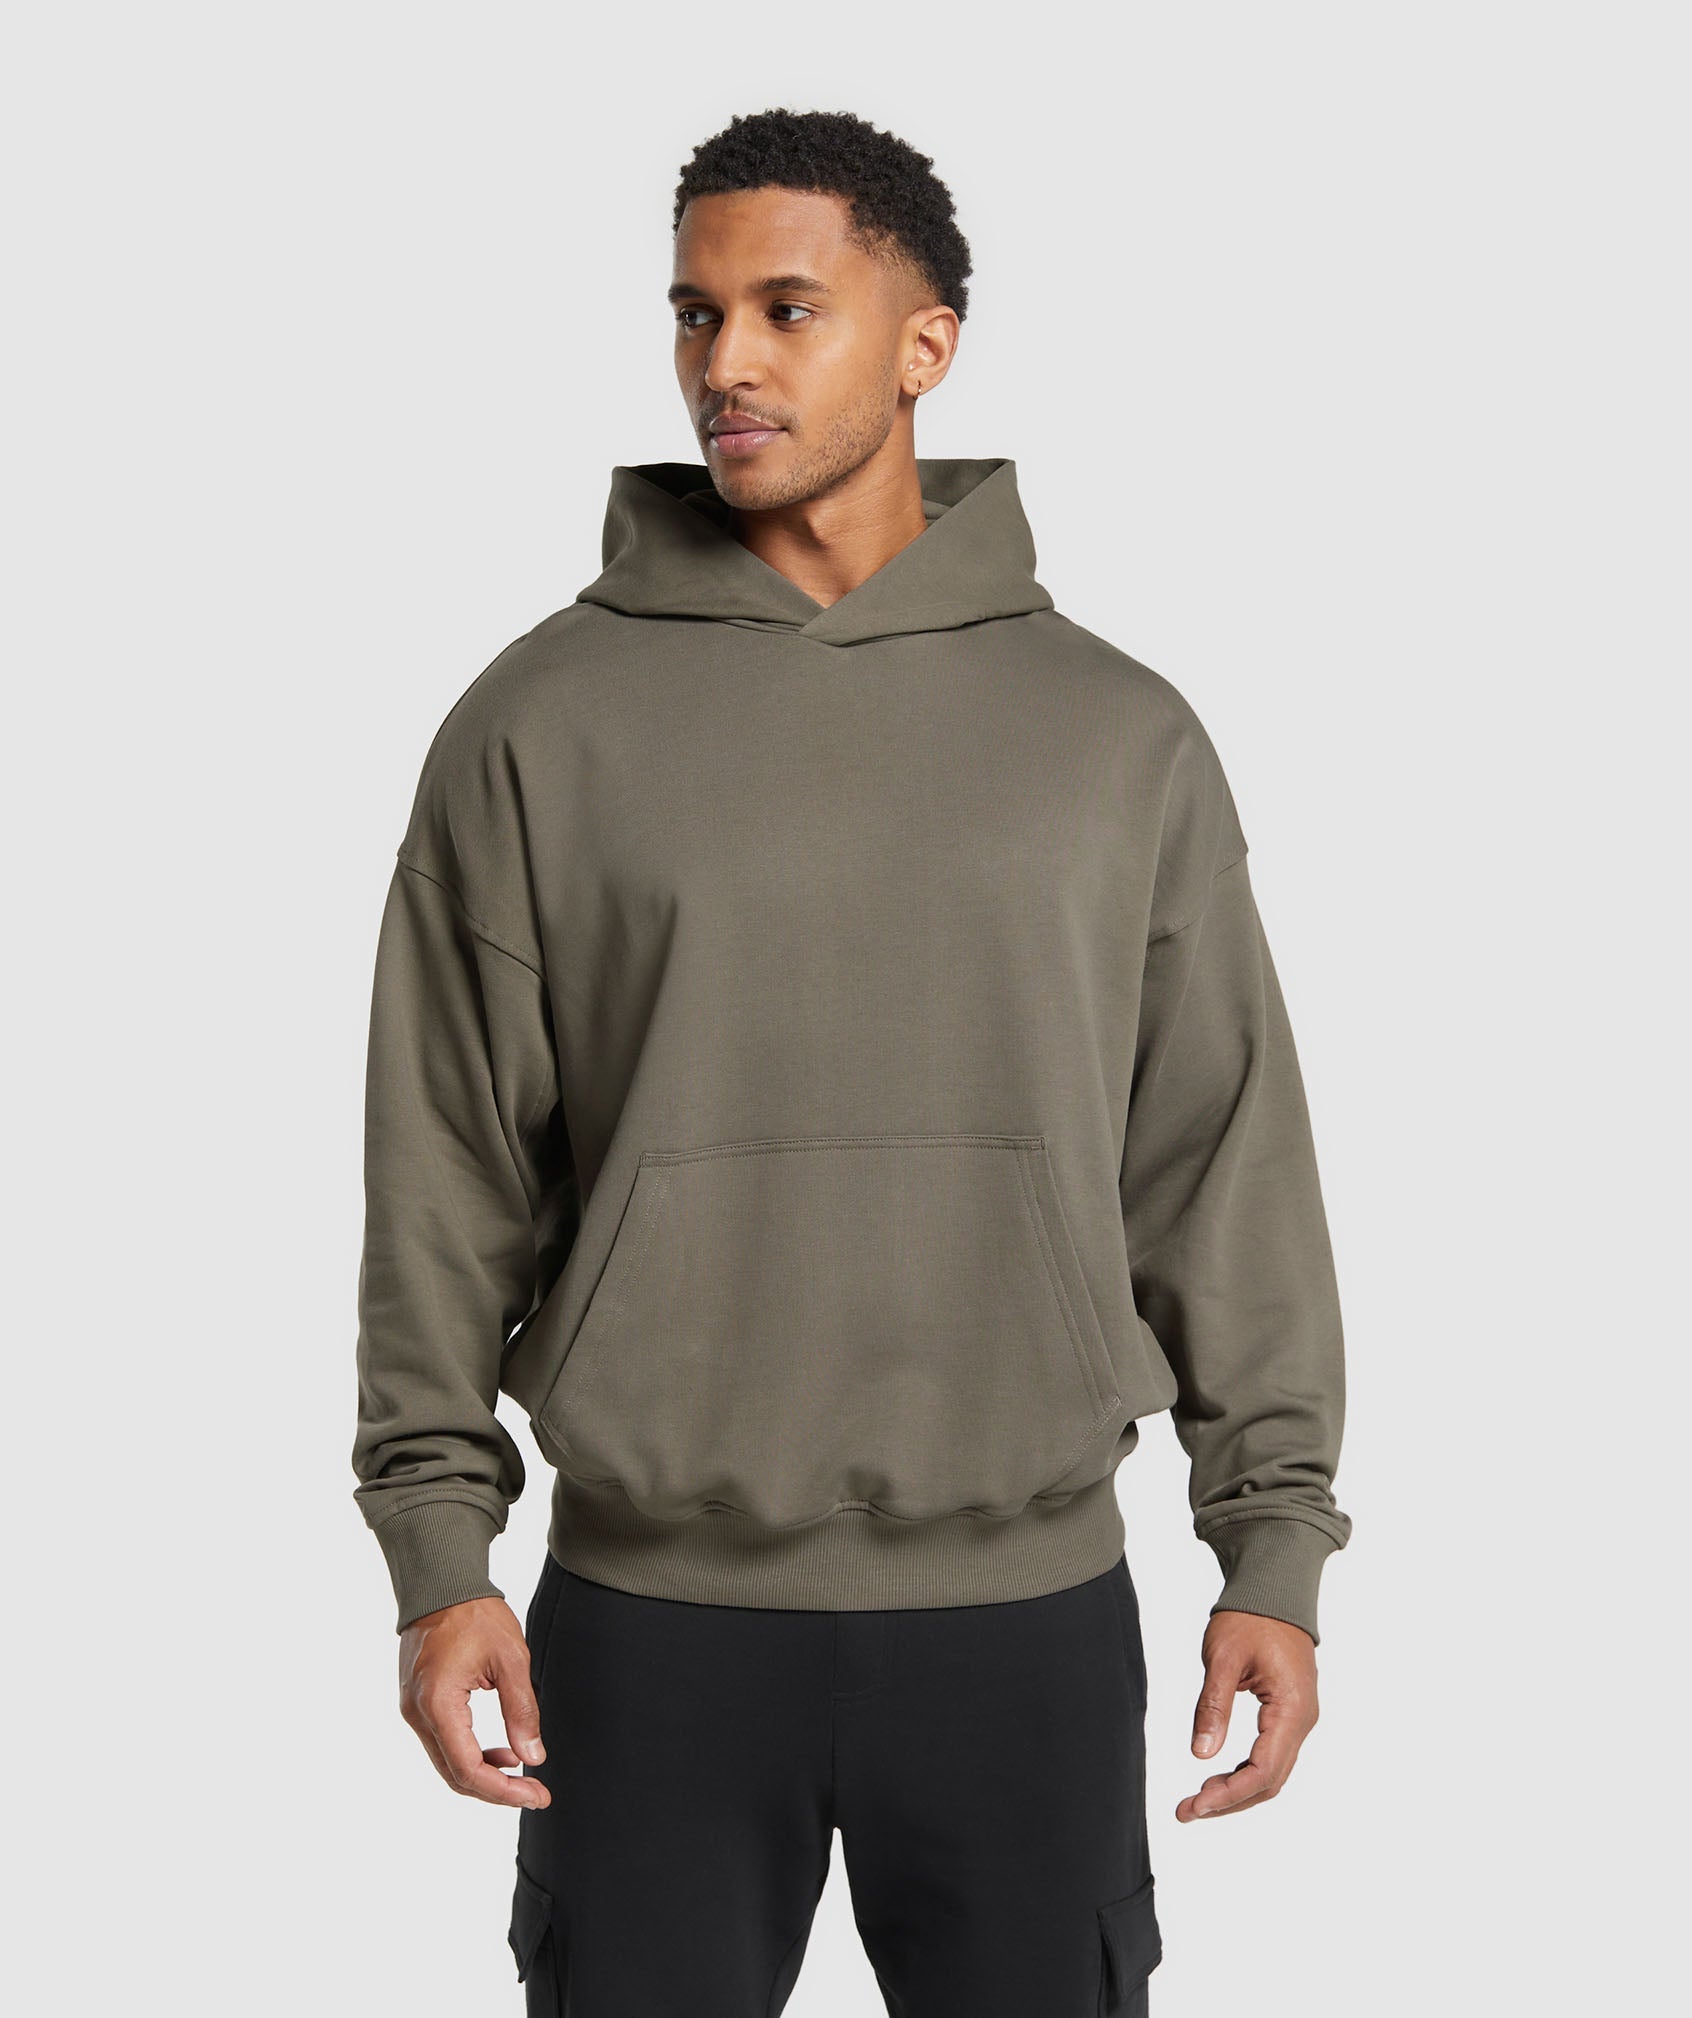 Rest Day Essentials Hoodie in {{variantColor} is out of stock